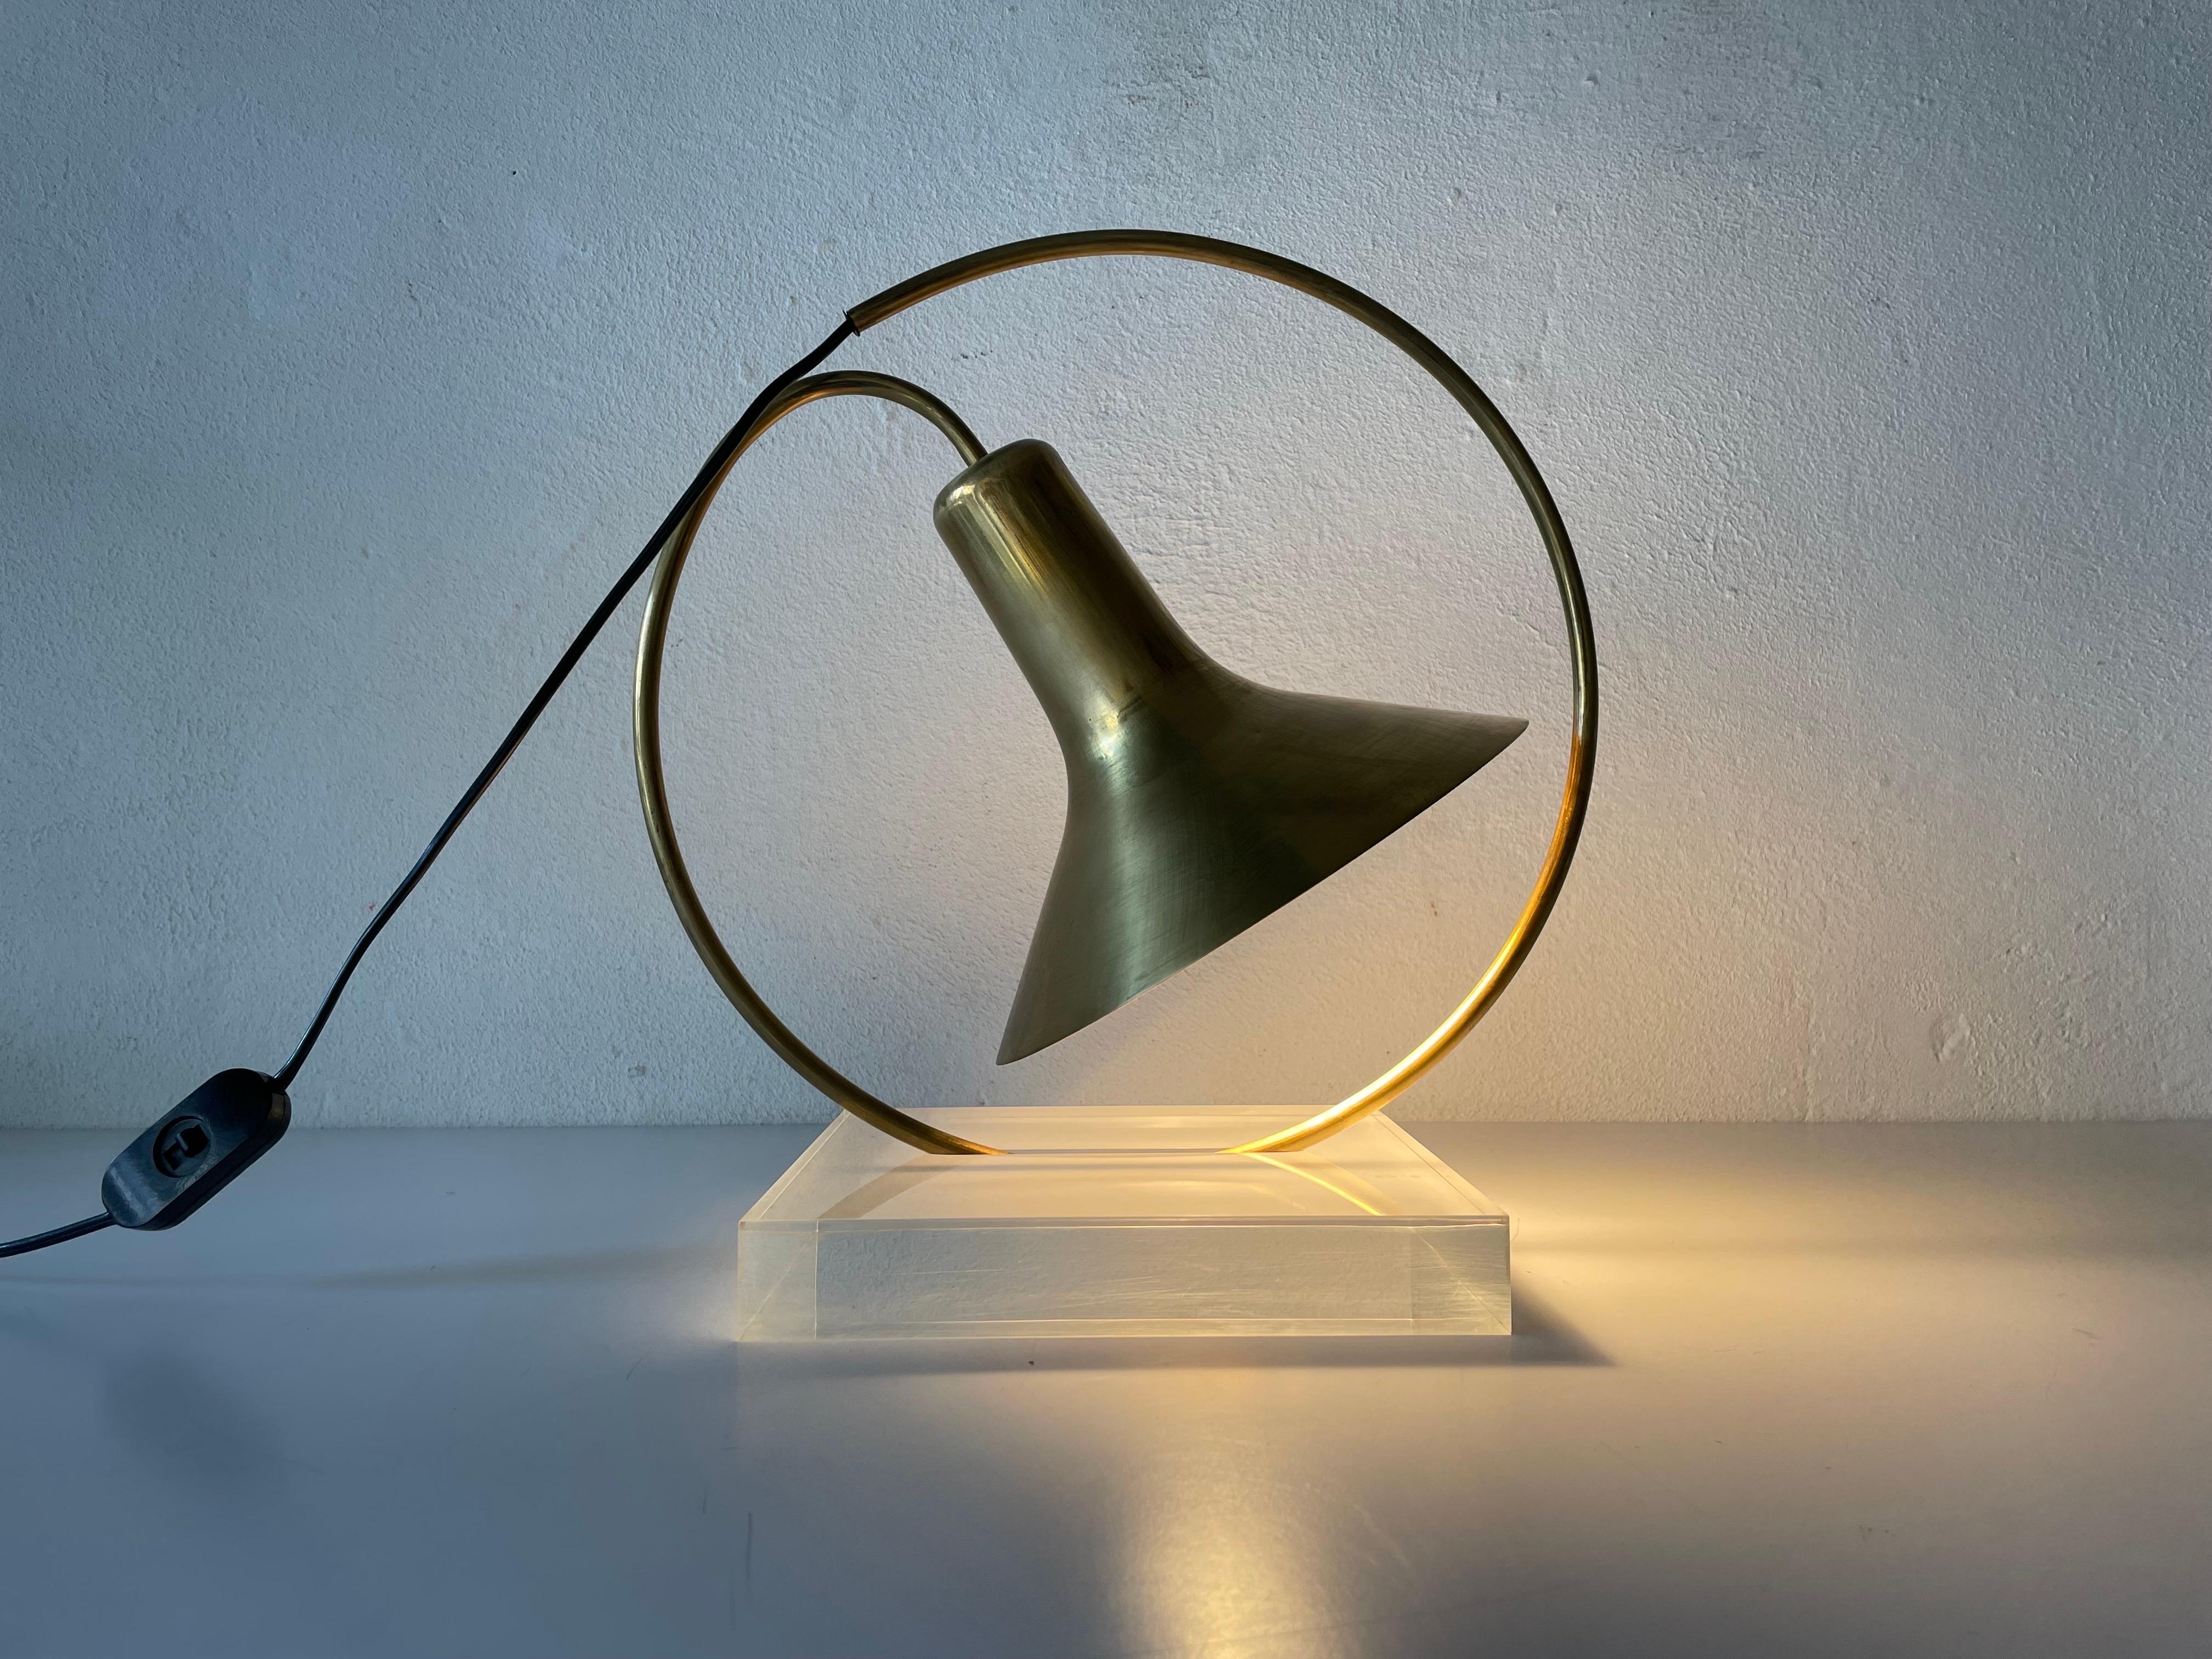 Brass & Lucite Trumpet Design Table Lamp, 1960s, Italy For Sale 6